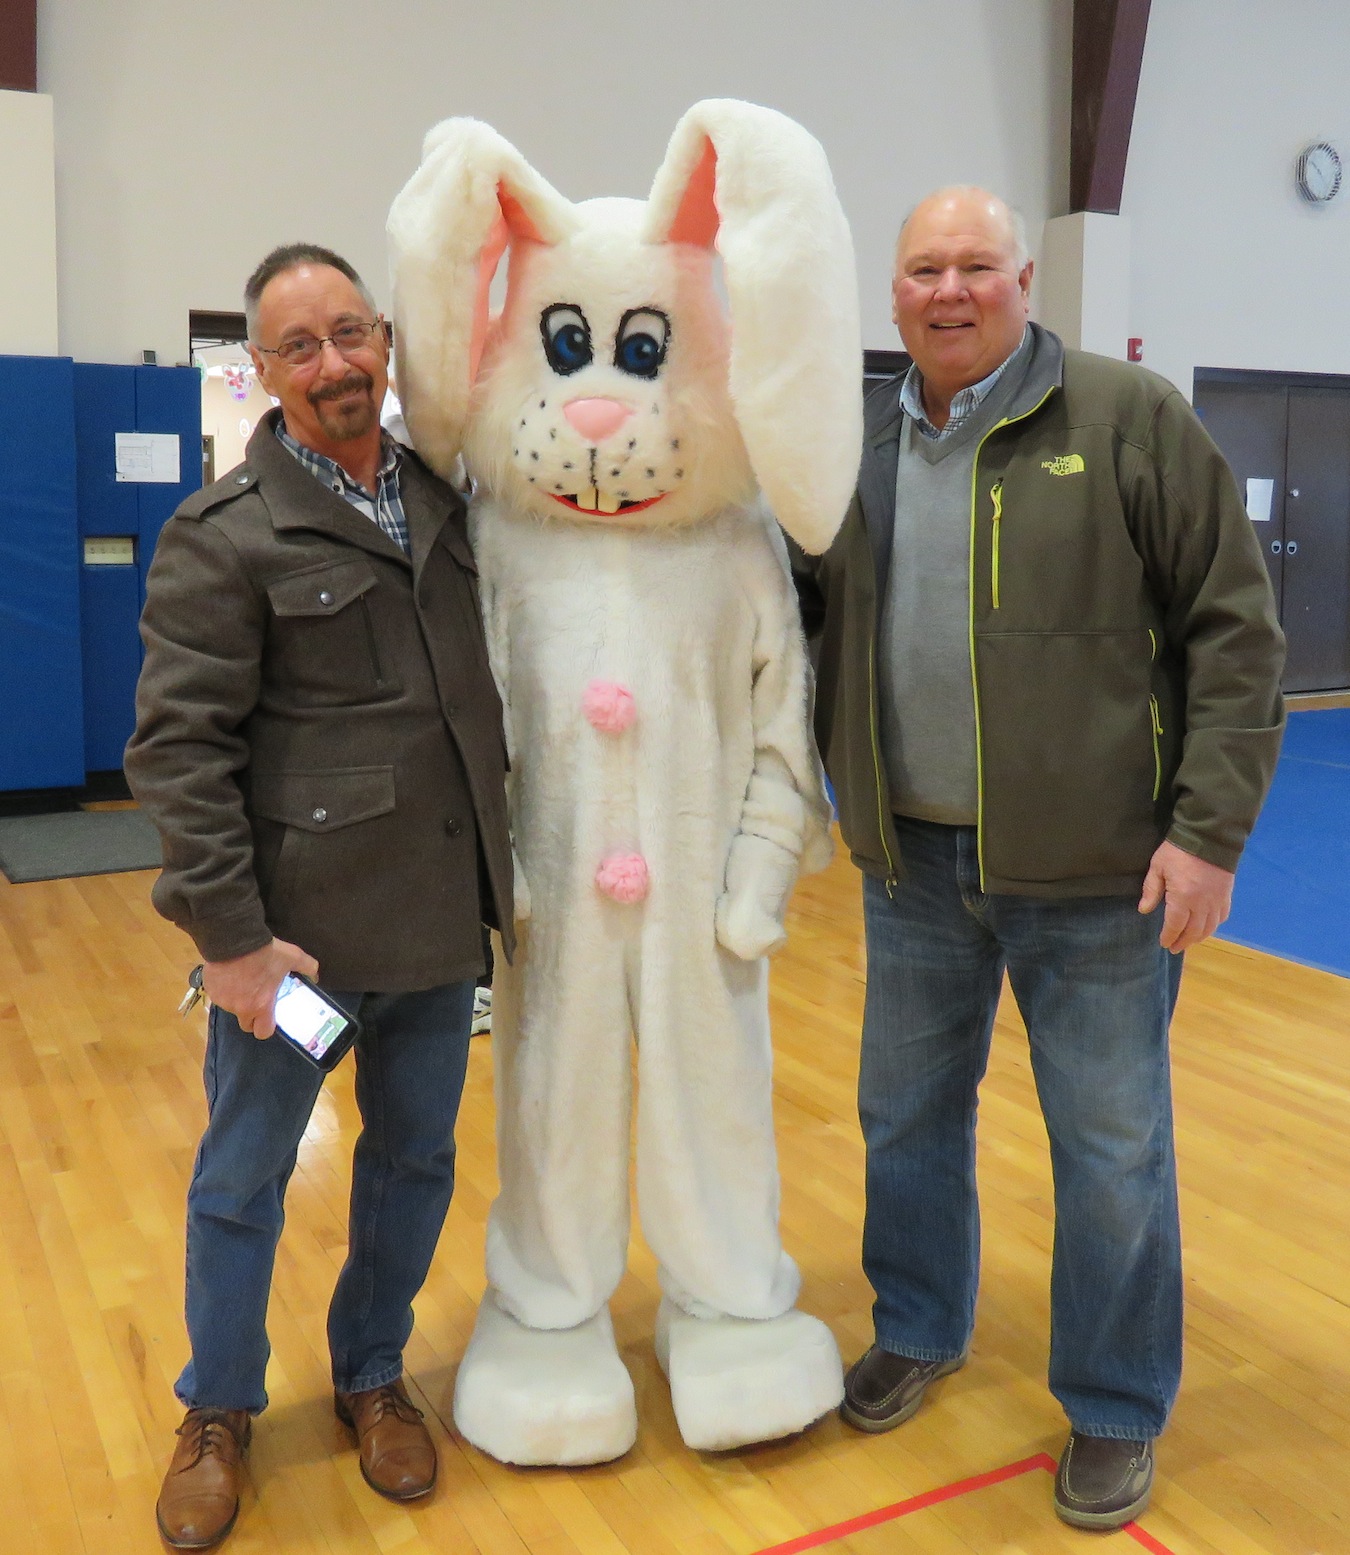 Wheatfield Supervisor Don MacSwan, the Easter Bunny and Councilman Gil Doucet pose for a photo at the 2018 Town of Wheatfield Easter party. (Photos by David Yarger)